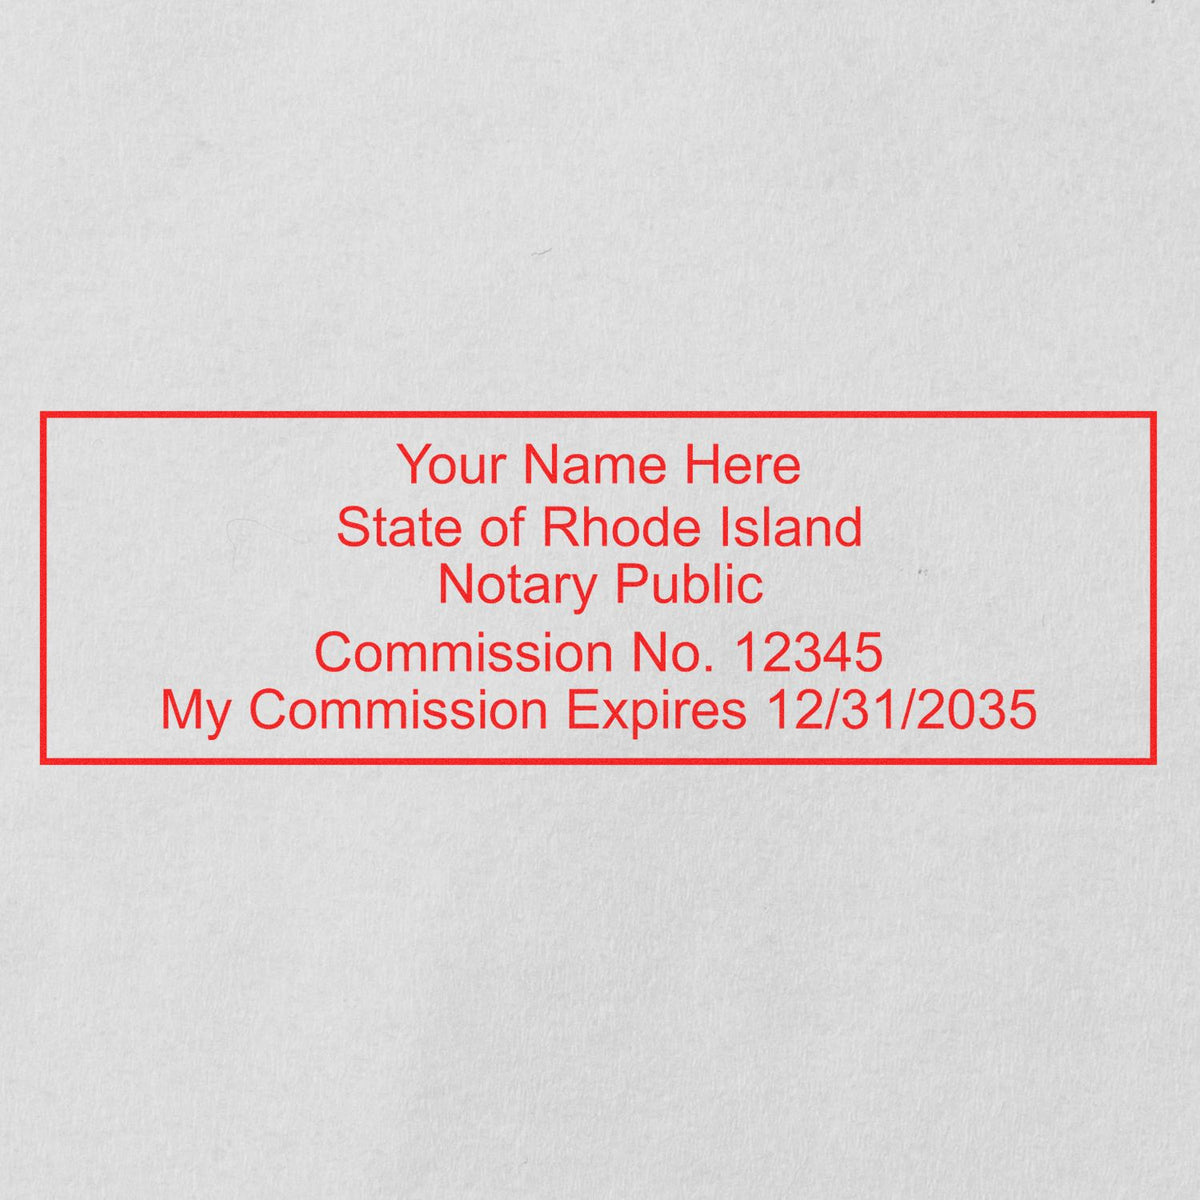 The Heavy-Duty Rhode Island Rectangular Notary Stamp stamp impression comes to life with a crisp, detailed photo on paper - showcasing true professional quality.